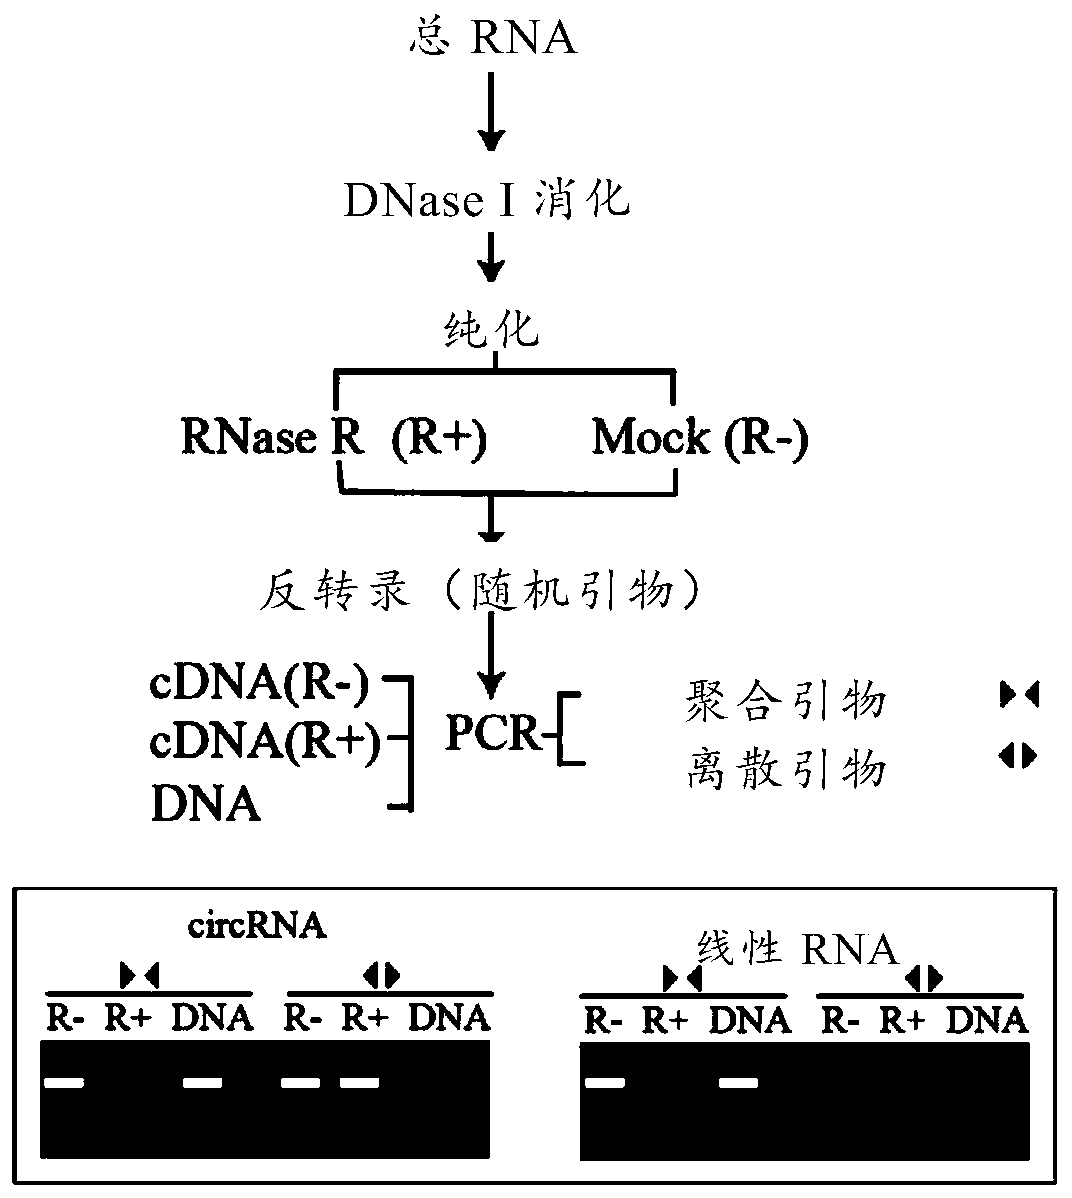 A circRNA PSY1-circ1 involved in lycopene biosynthesis